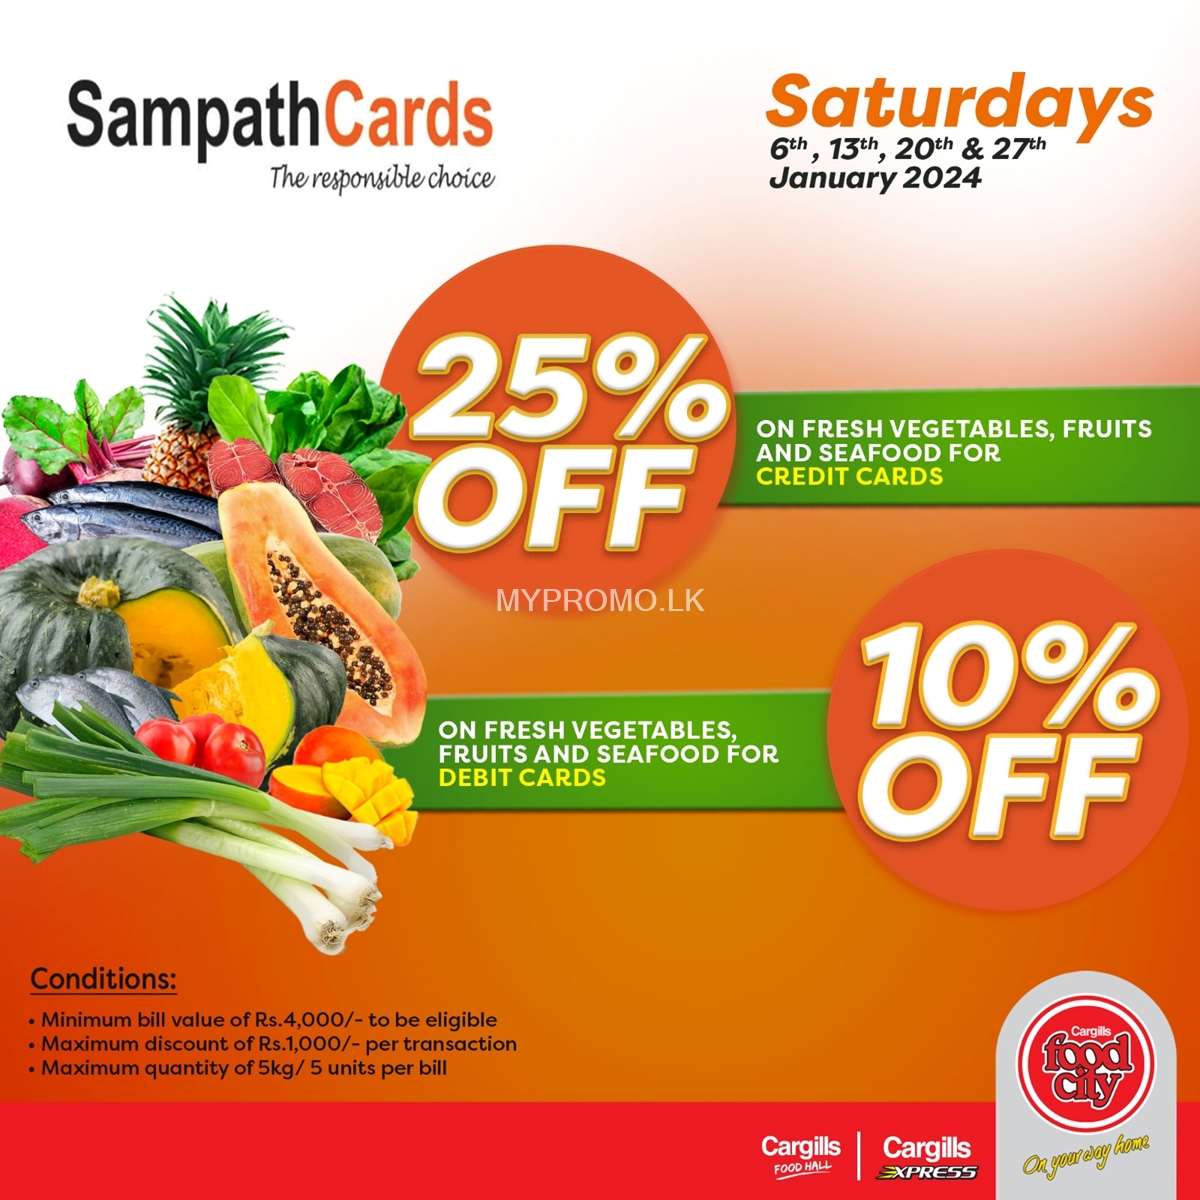 Get up to 25% off at Cargills Food City with Sampath Cards